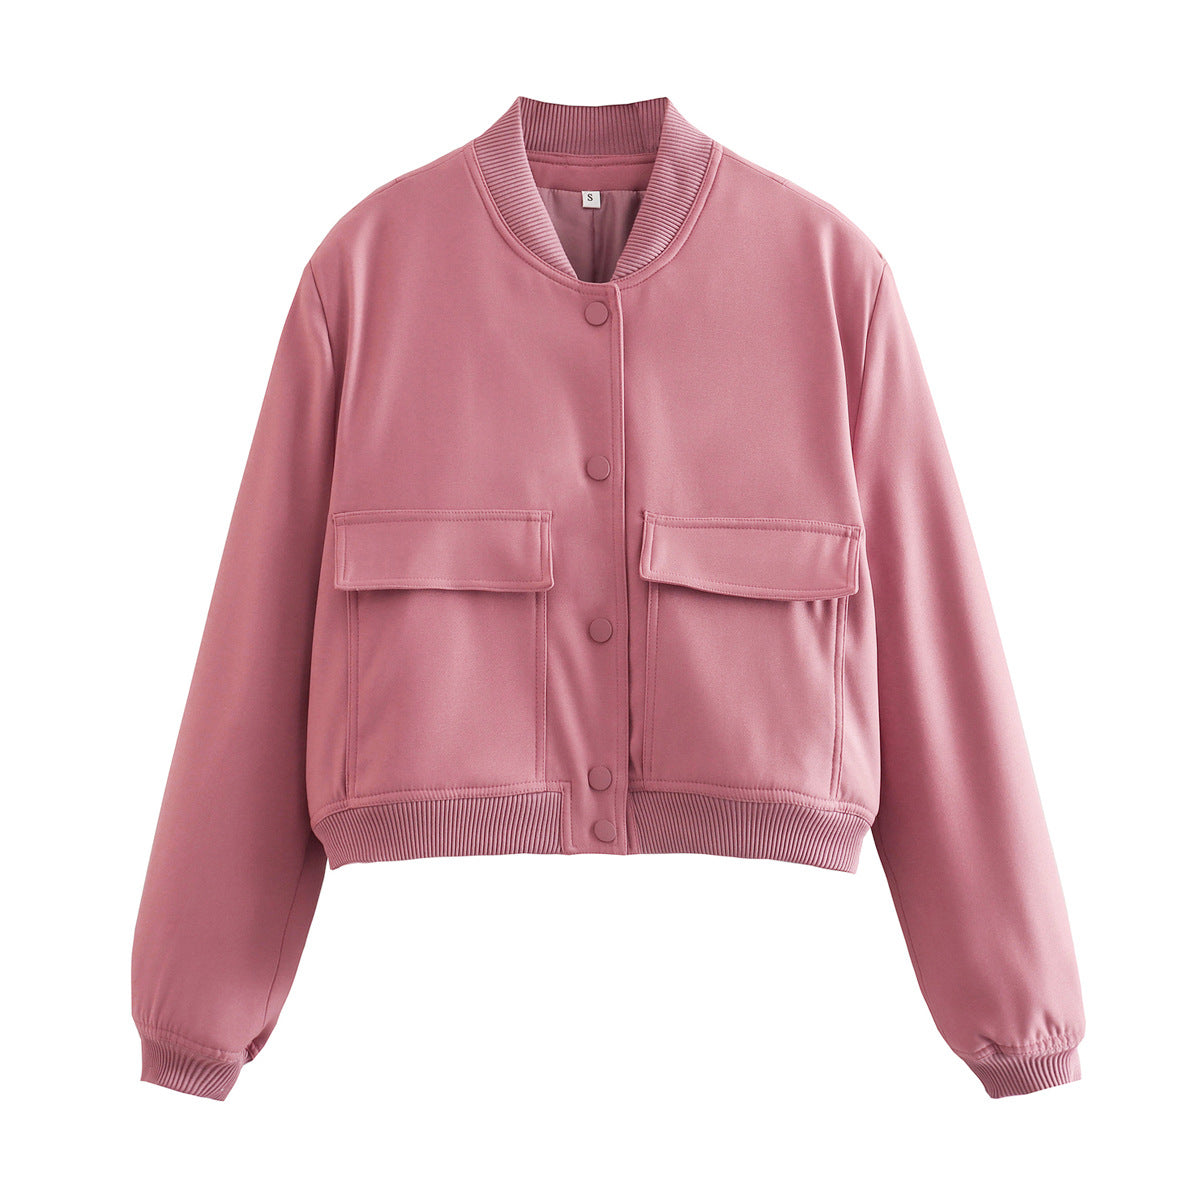 Moto-Chic Bomber Jacket - Try Modest Limited 